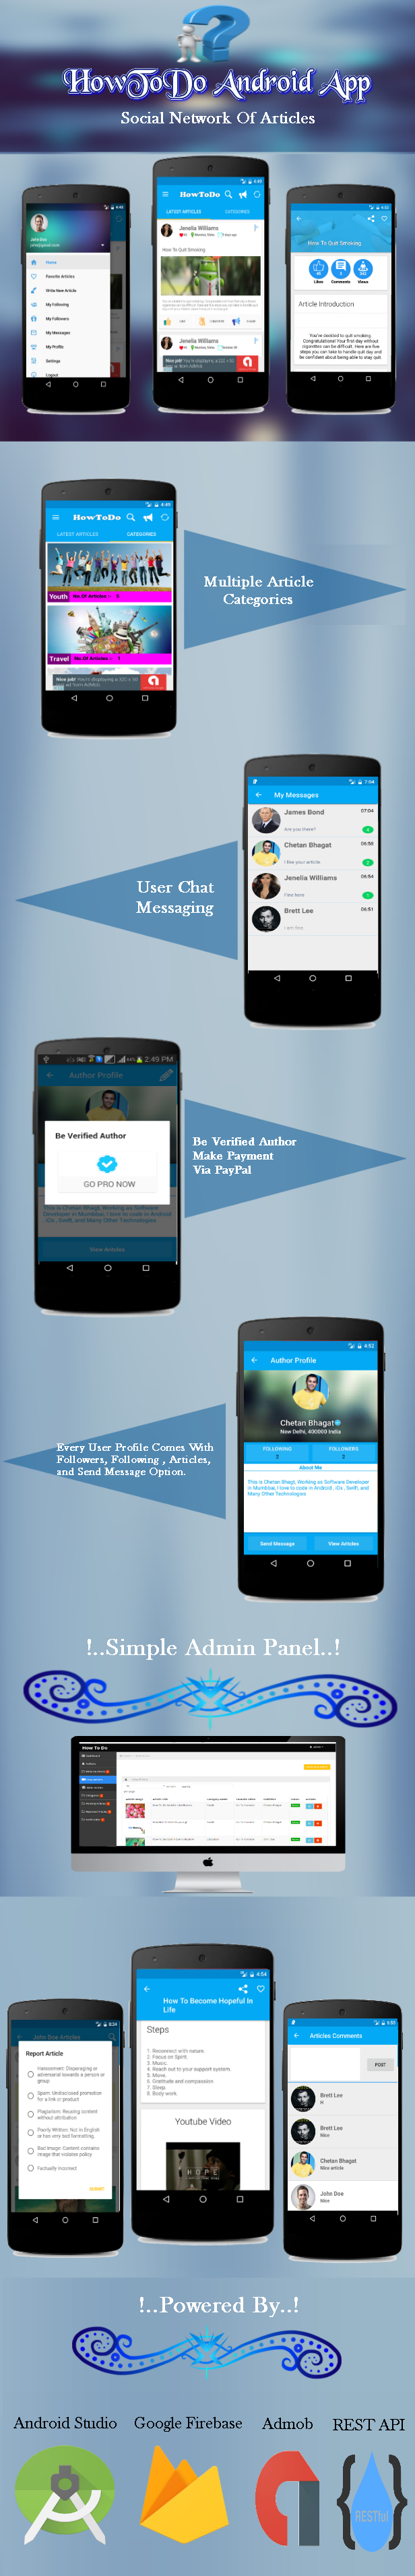 HowToDo Android App :- Social Network of Articles - 1